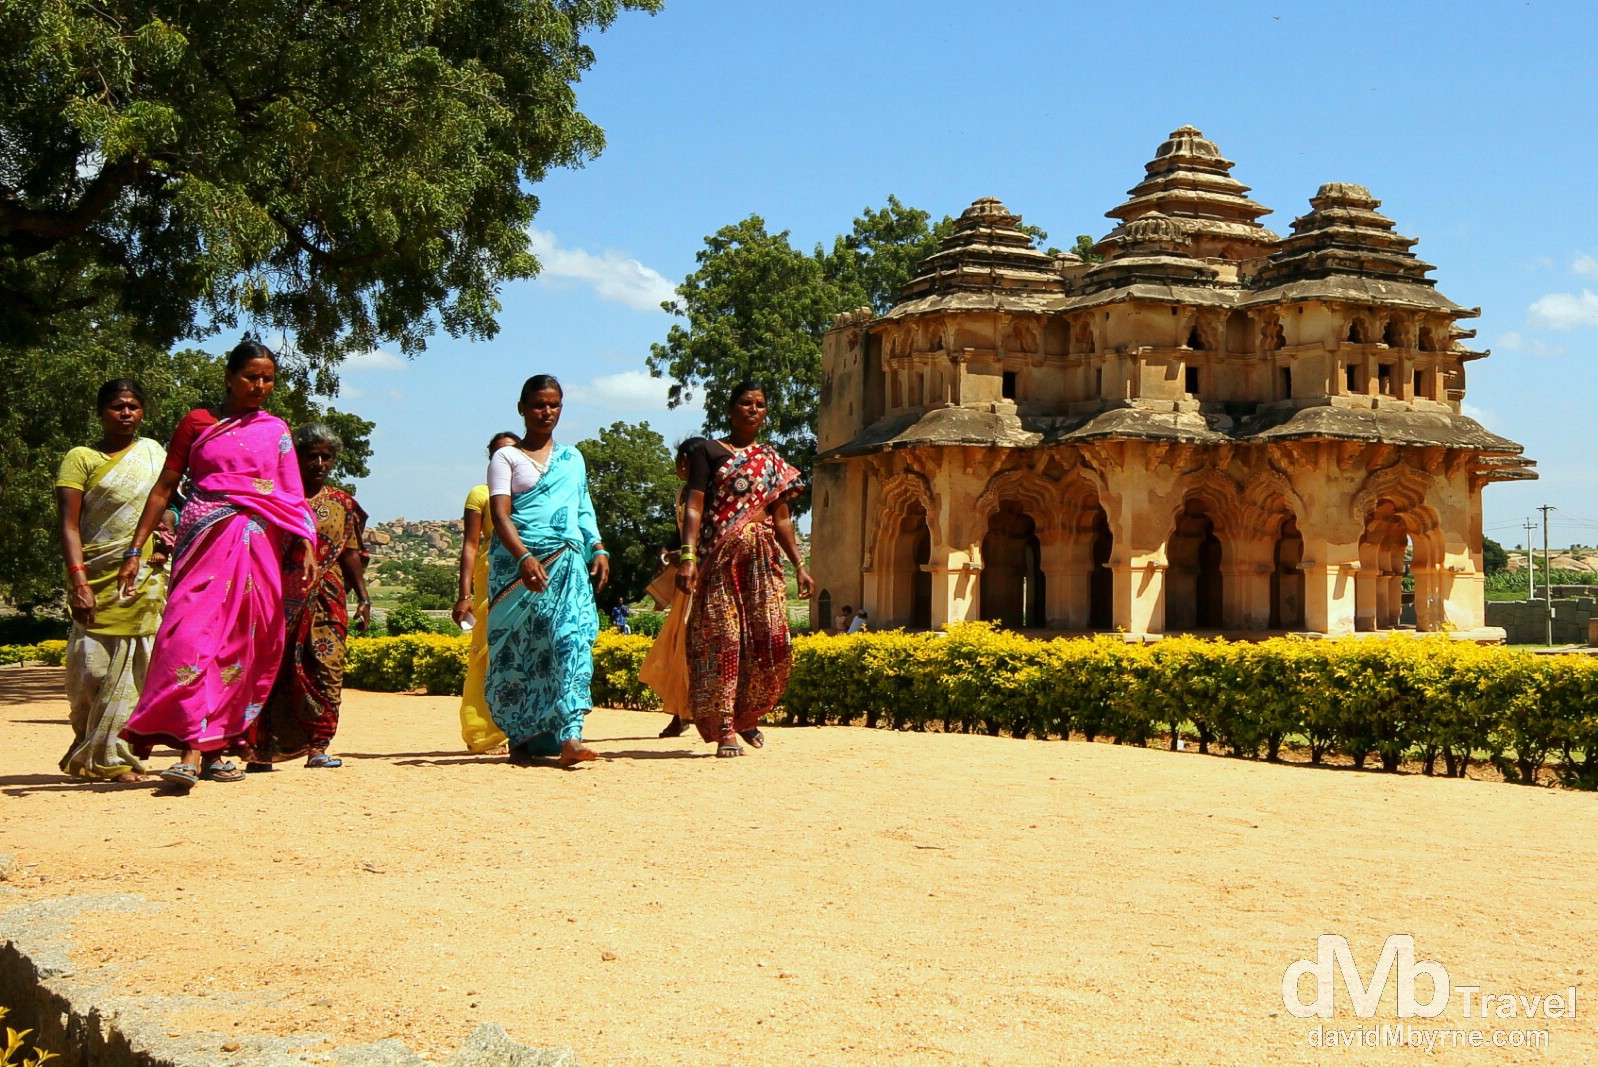 Walking in the The Royal Centre in view of the Lotus Palace. Hampi, Karnataka, India. September 24th 2012.